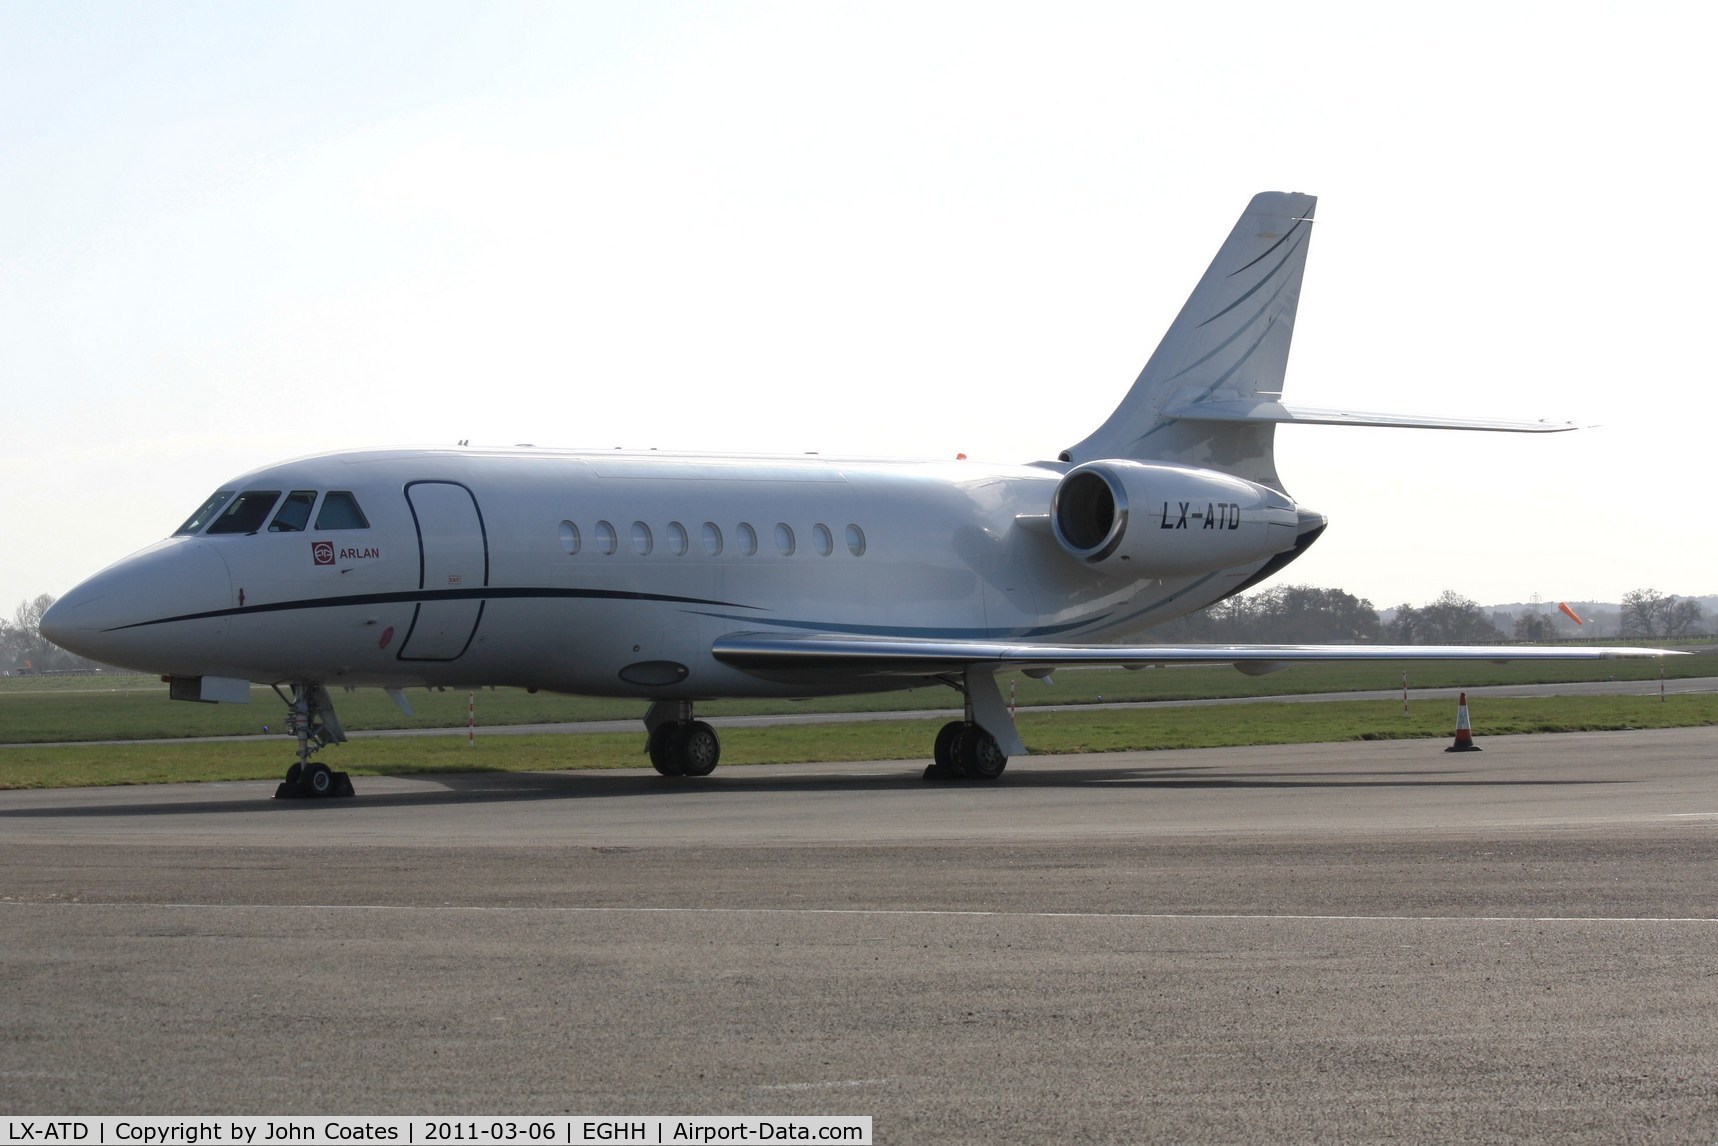 LX-ATD, 2008 Dassault Falcon 2000DX C/N 603, At Sigs